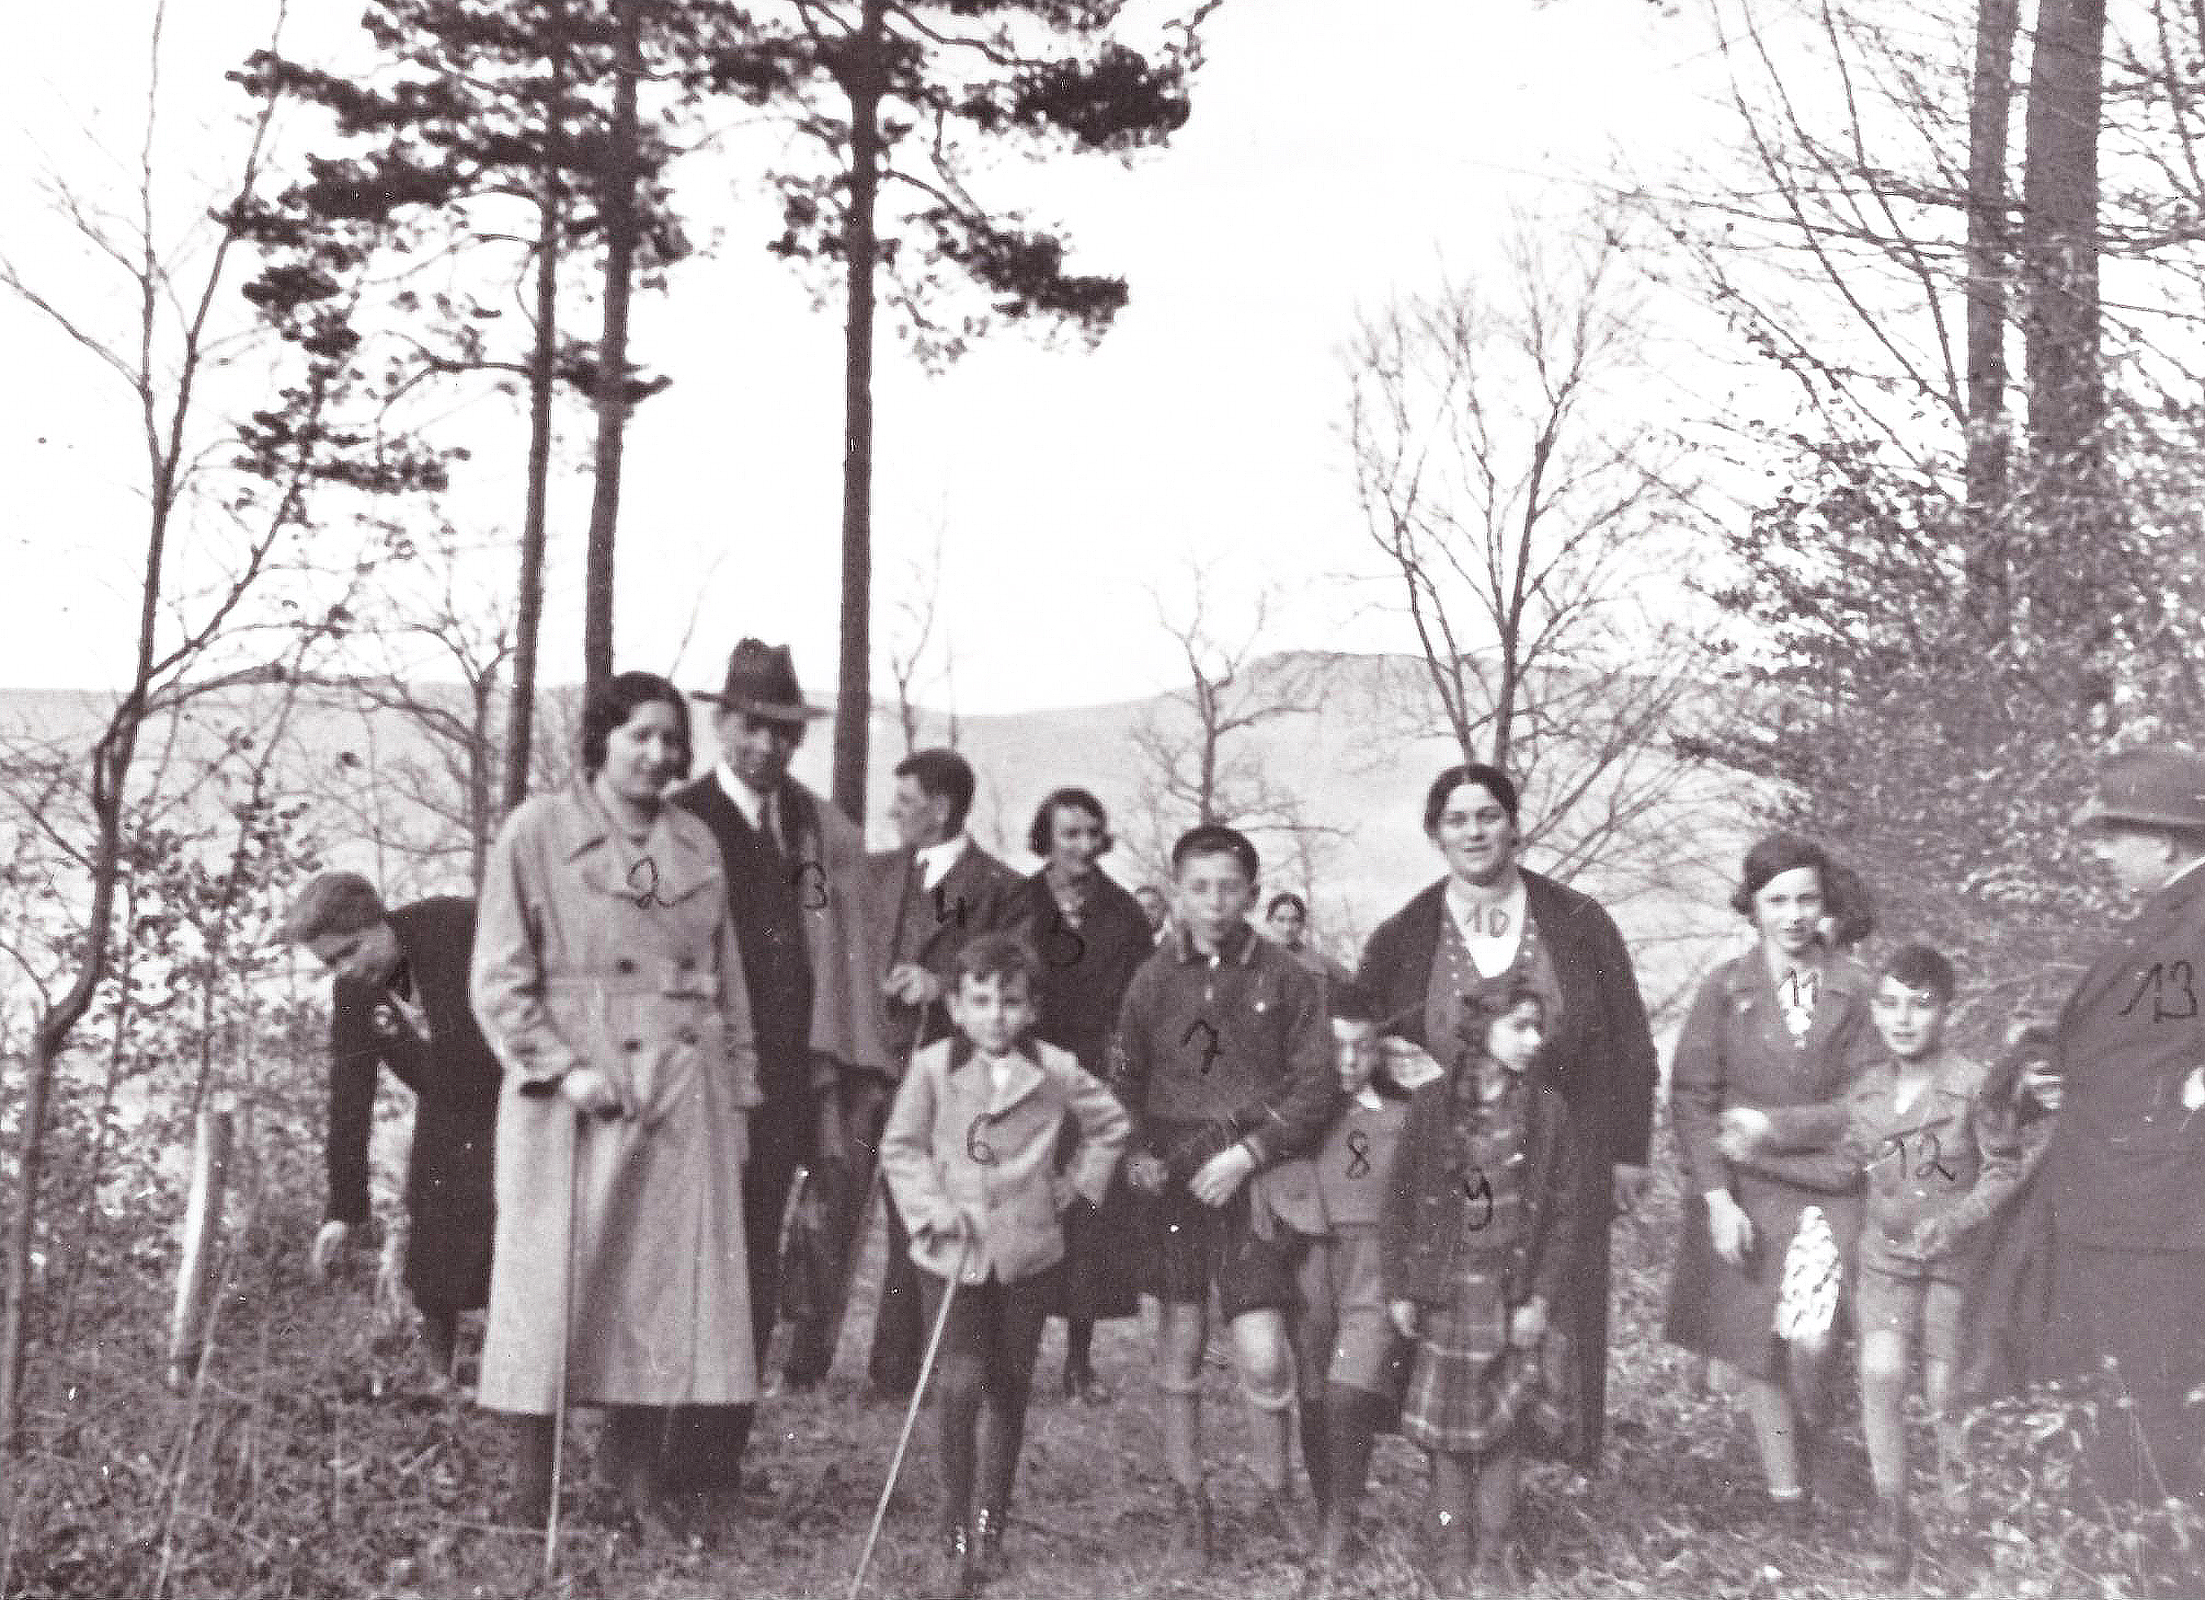 In the picture, Manfred can be seen on an outing with other Jews from Hechingen in the Swabian Alb.